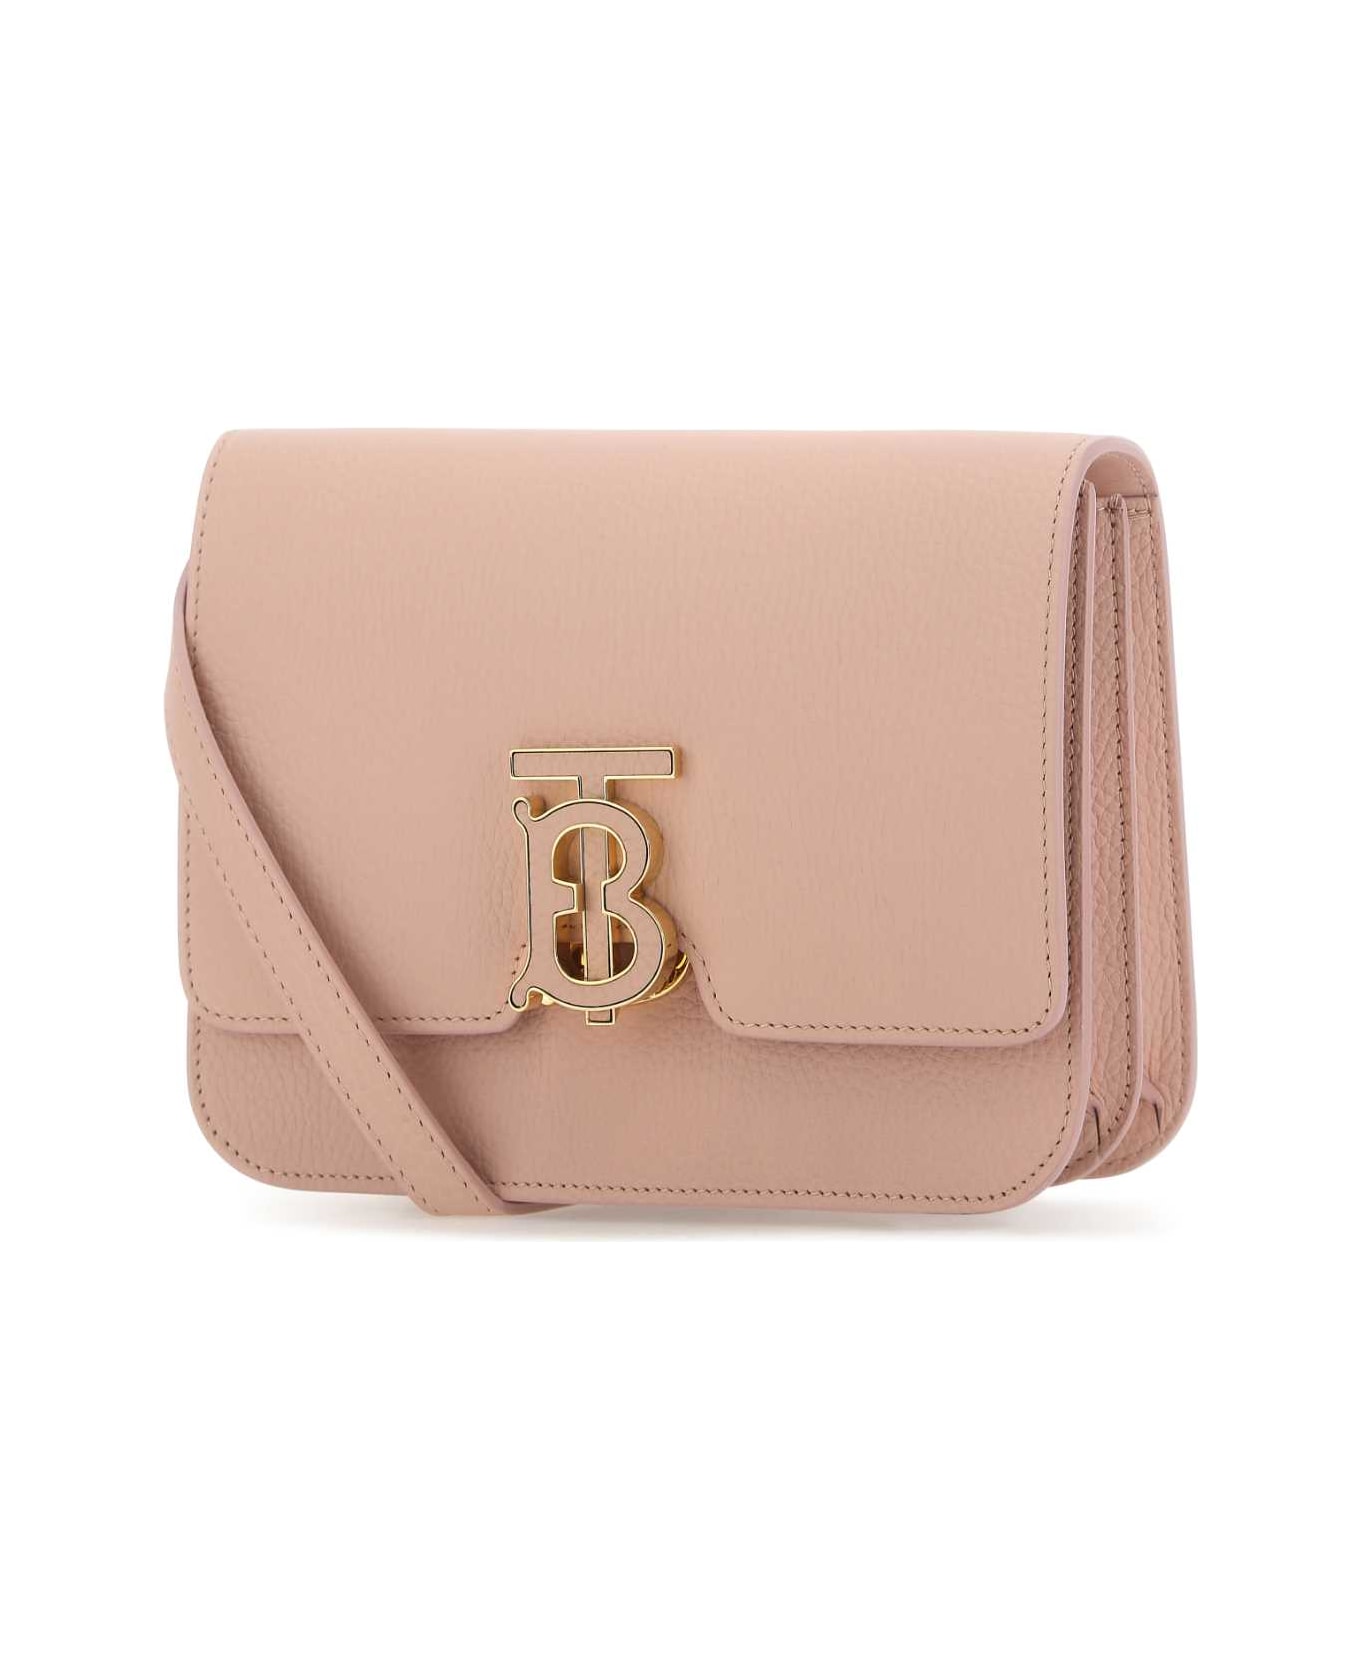 Burberry Pink Leather Small Tb Crossbody Bag - A3661